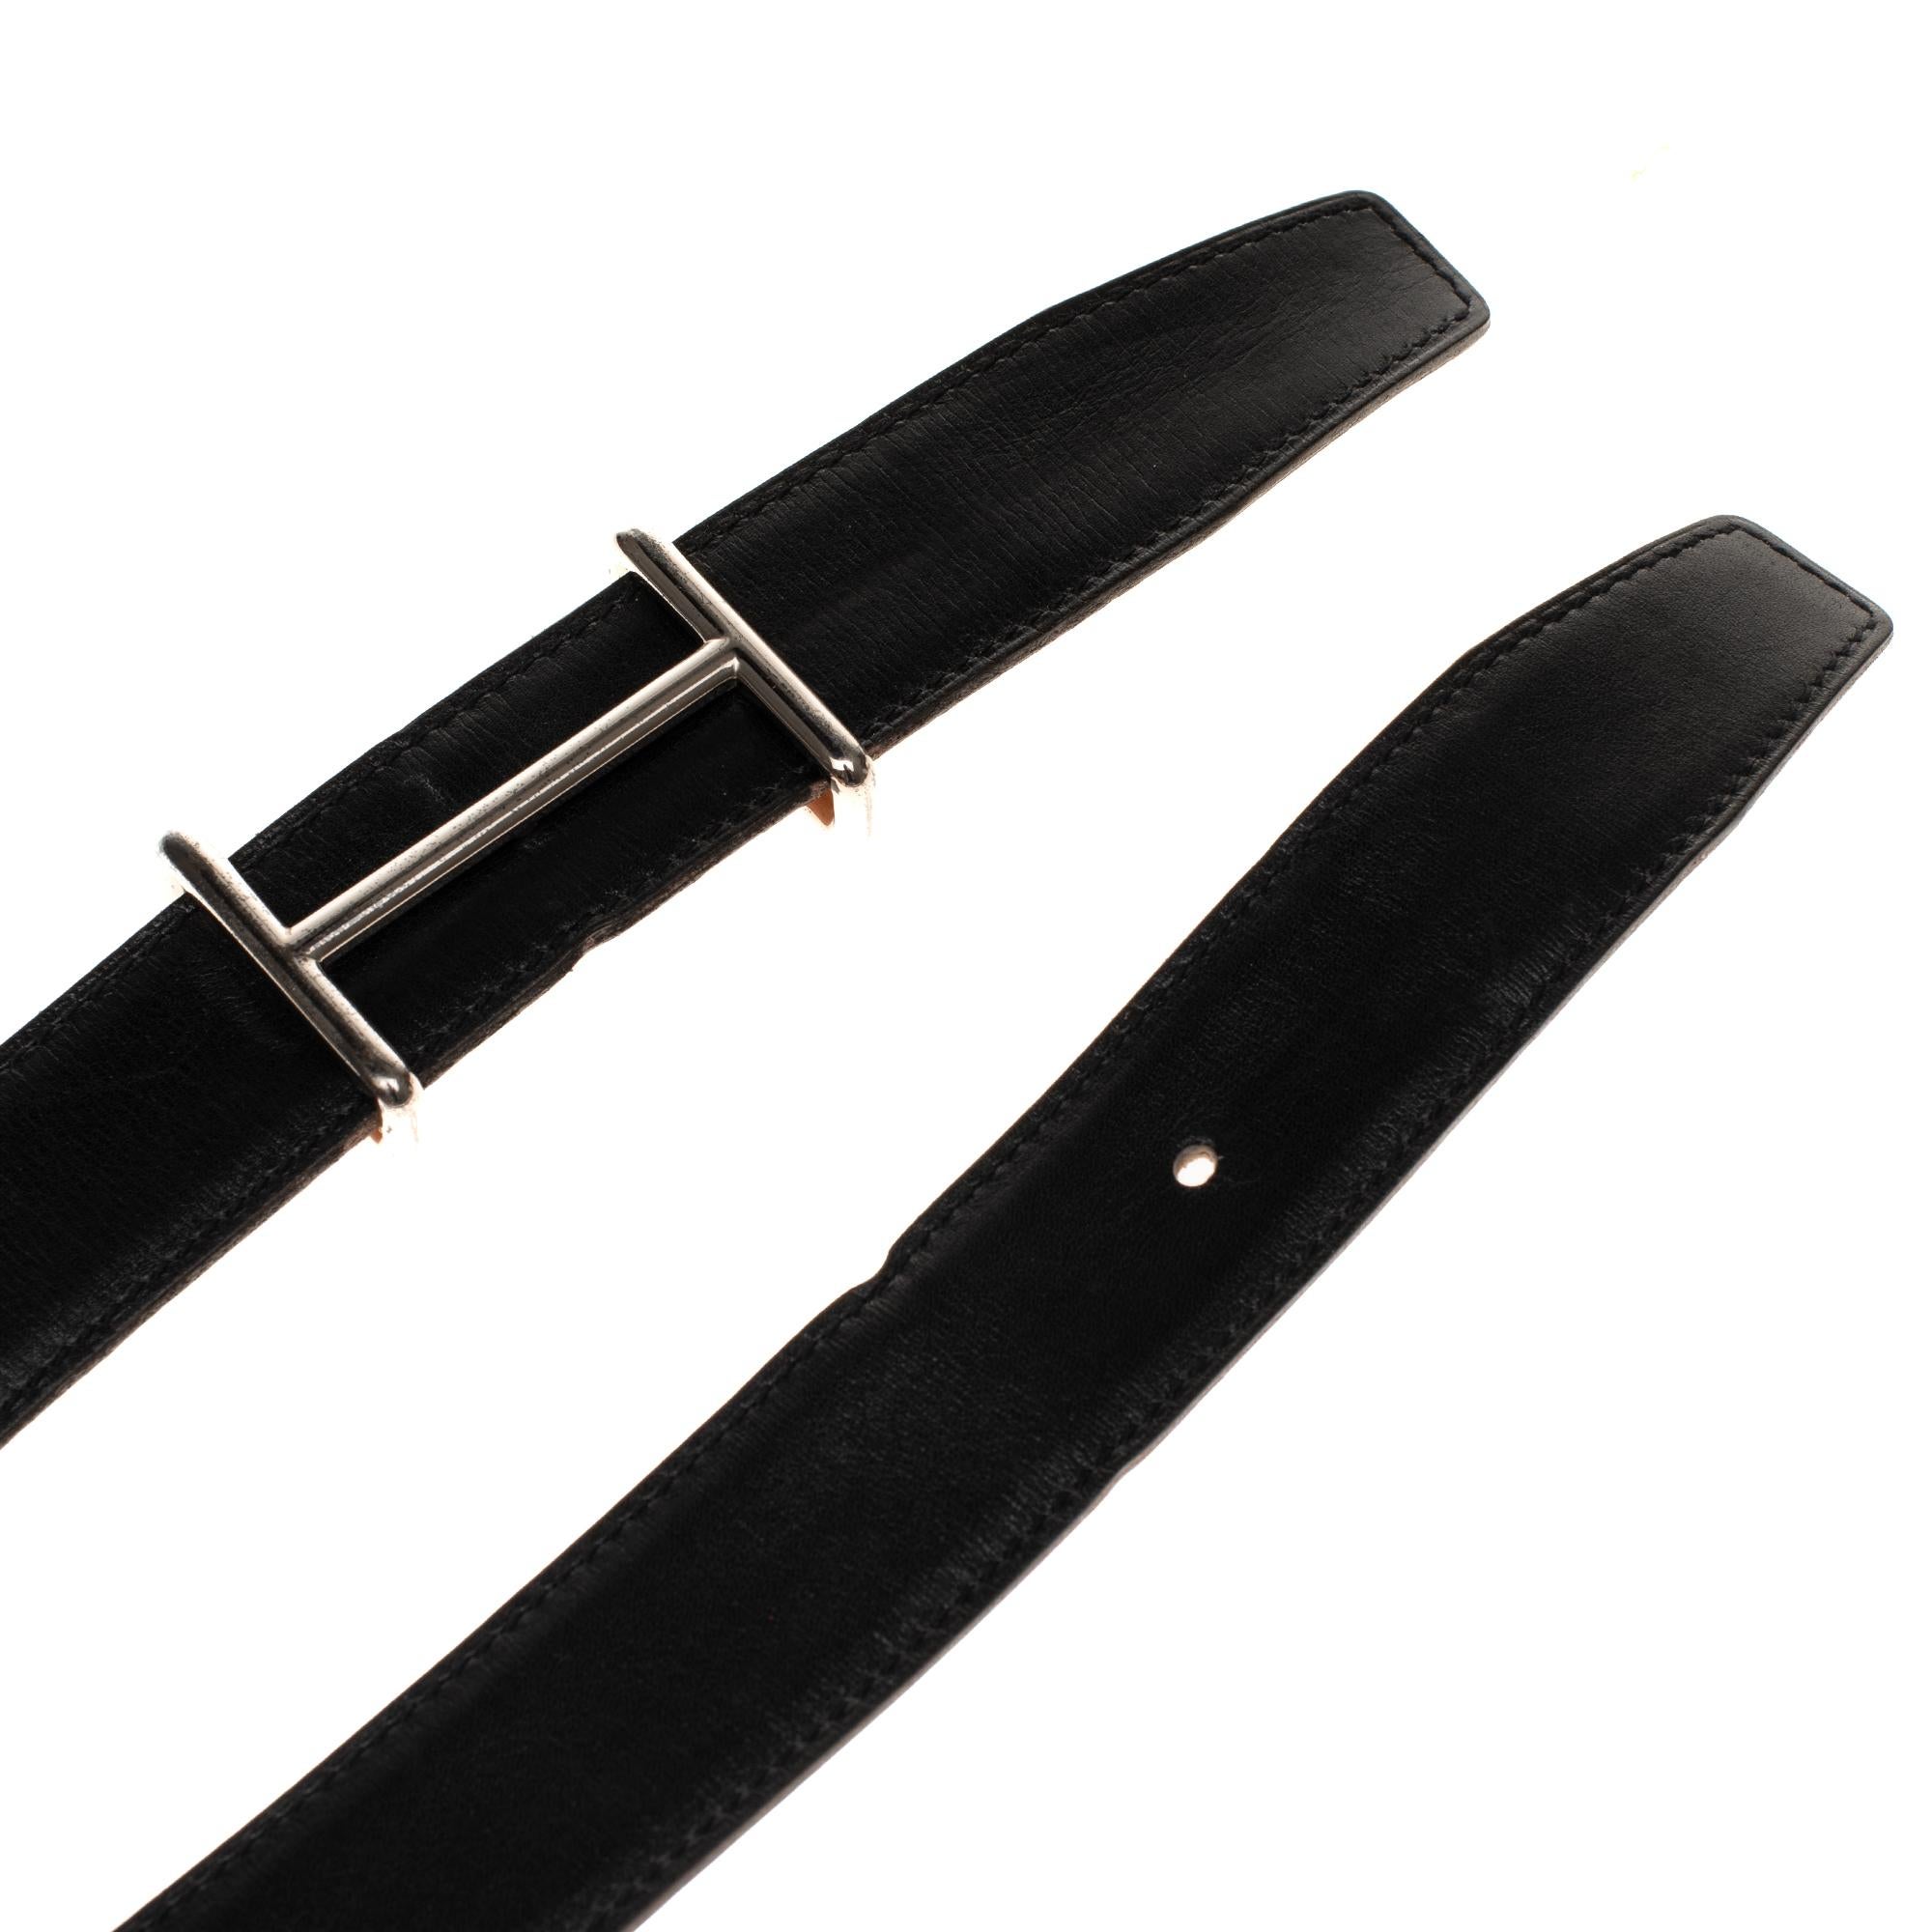 Hermes Reverso belt in reversible leather black calfskin & Togo gold.
Size: 105 cm
Signature: Hermès Paris, Made in France
Dimensions: 3.2 cm * 105 cm

Very good condition despite some marks of use on leather and hardware